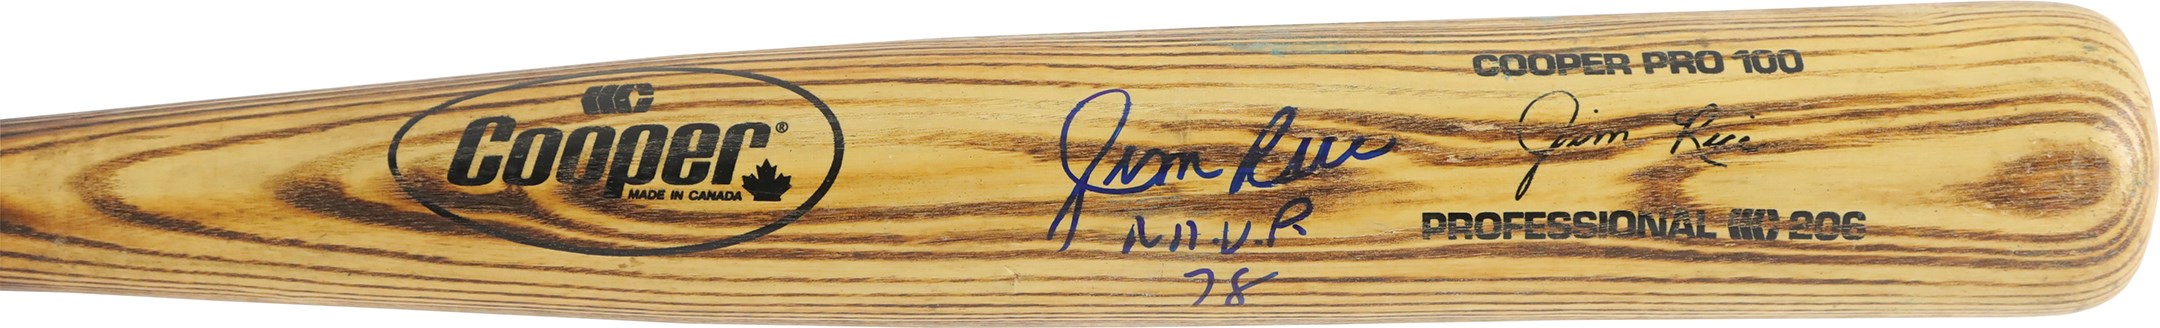 - Circa 1986 Jim Rice Autographed Bat Used by Don Baylor